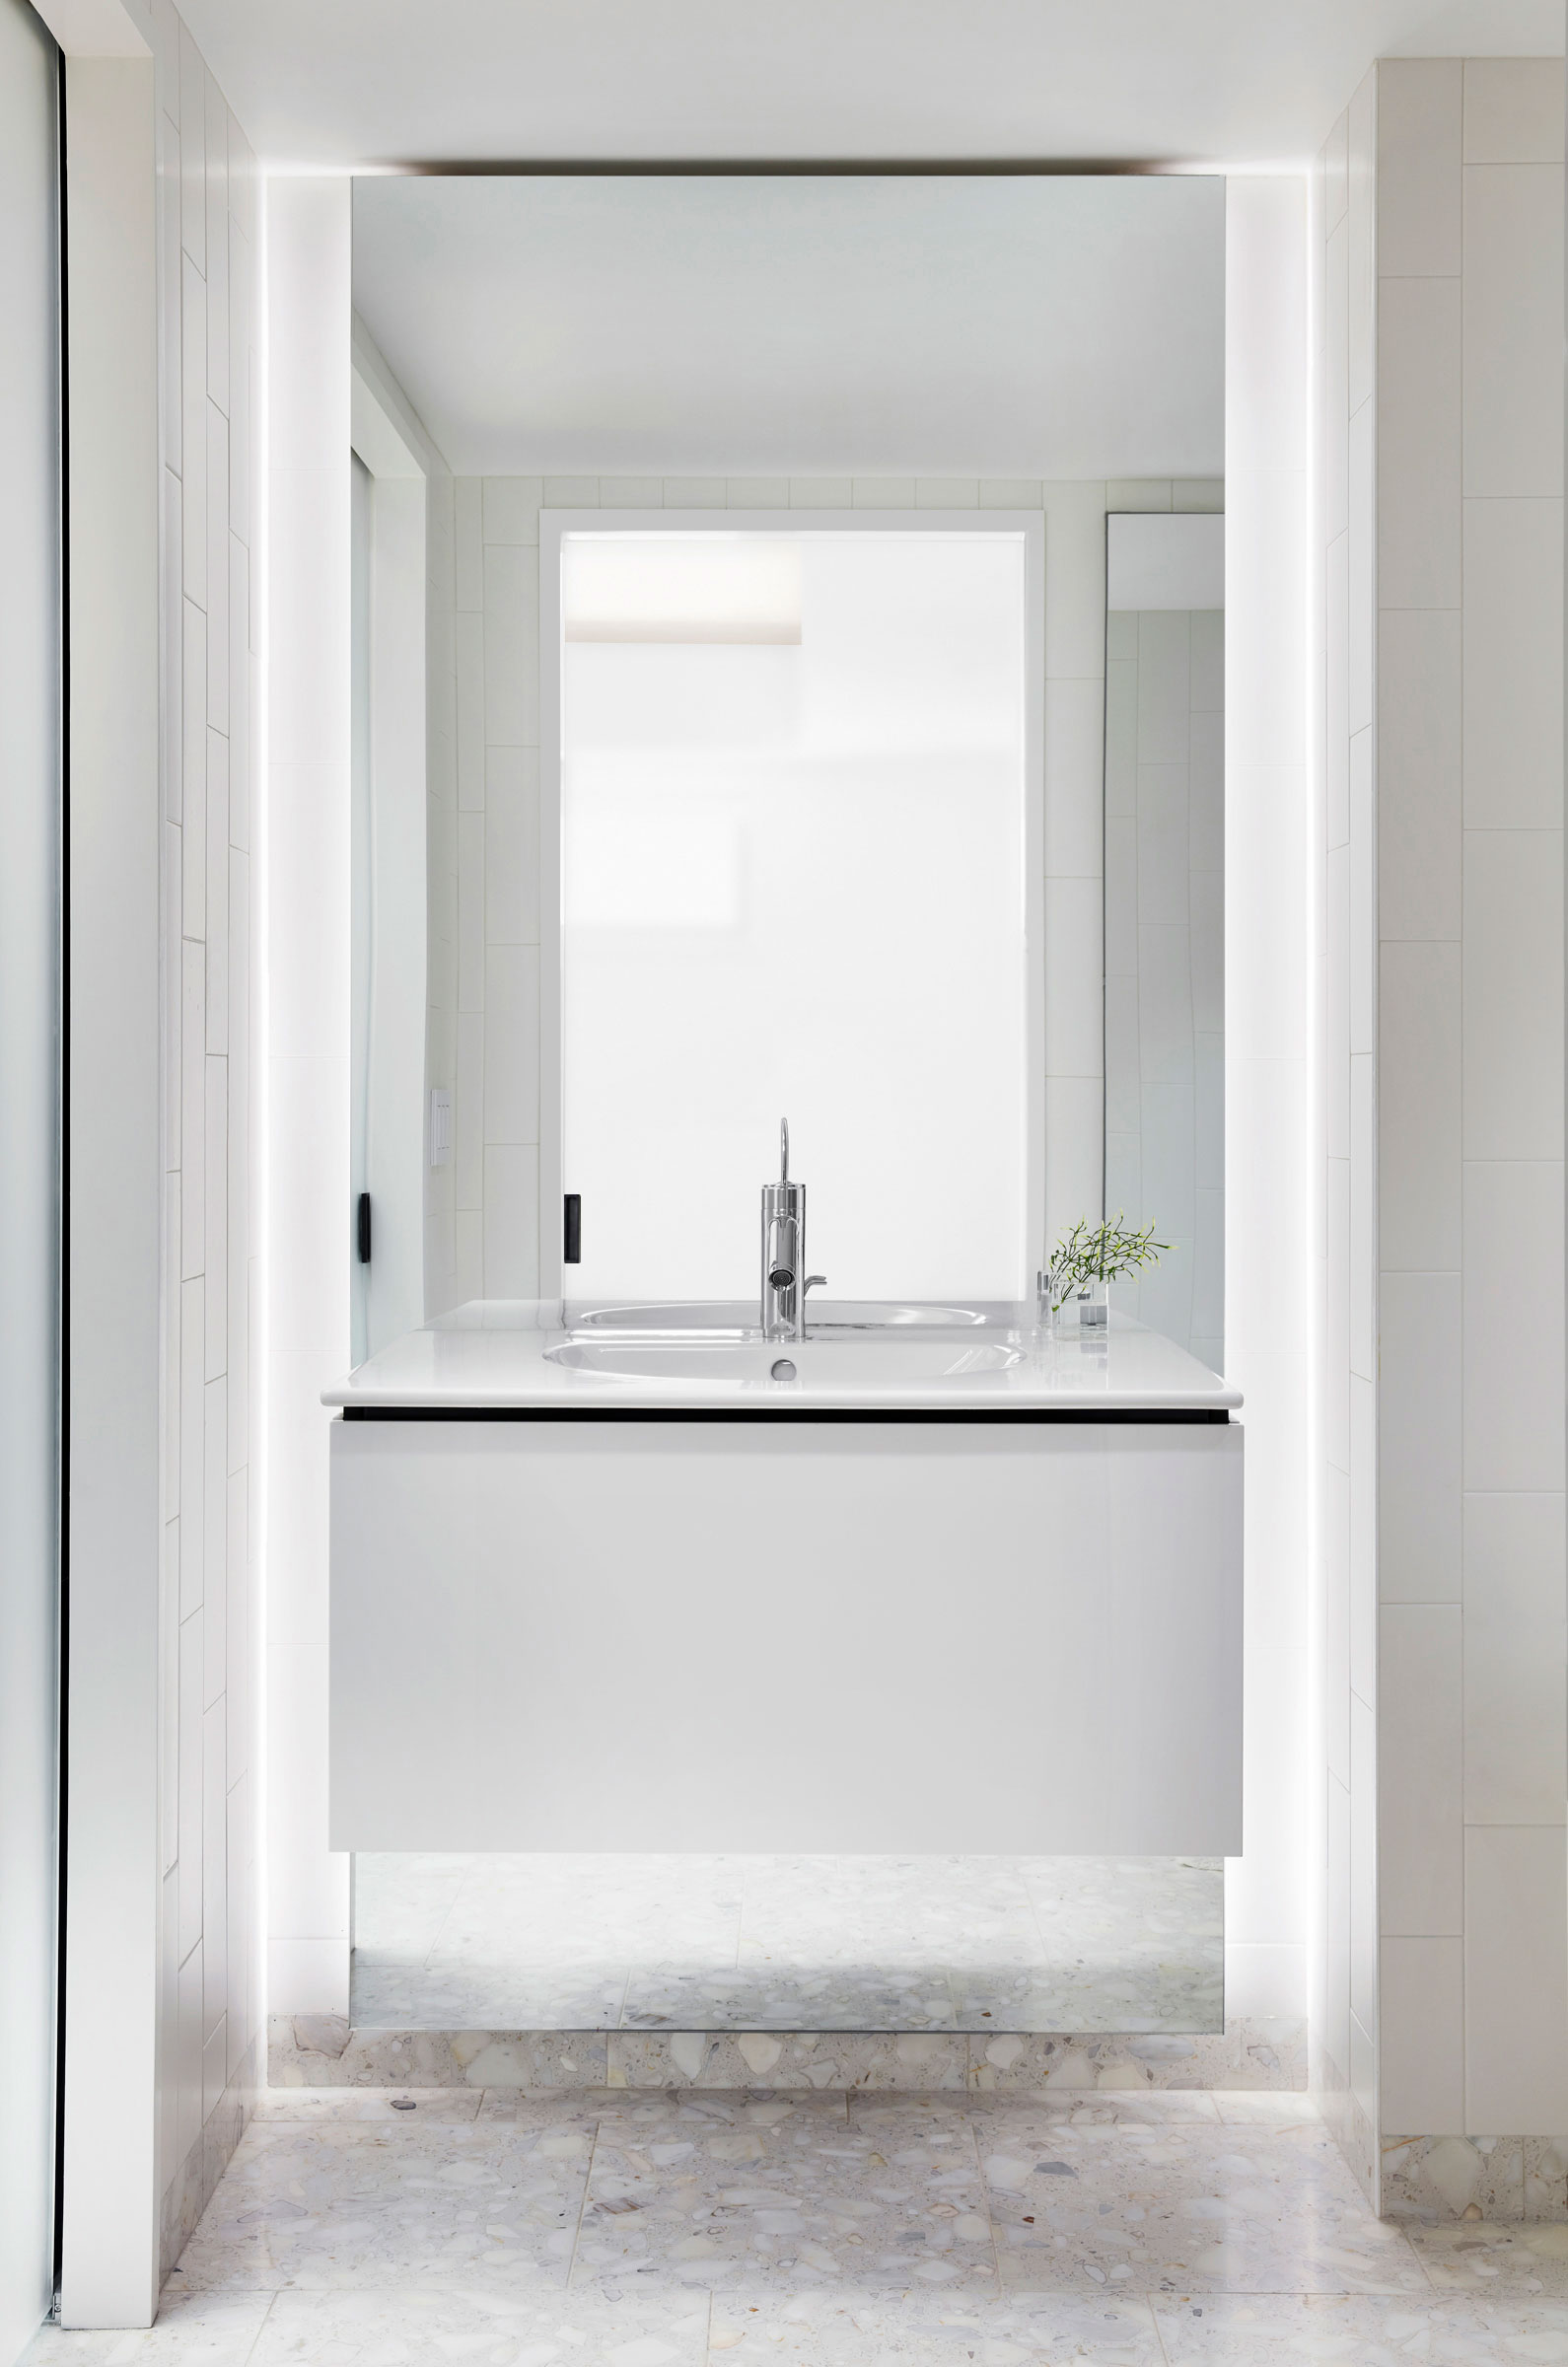 Chelsea Pied-à-Terre by STADT Architecture. Photo: David Mitchell.